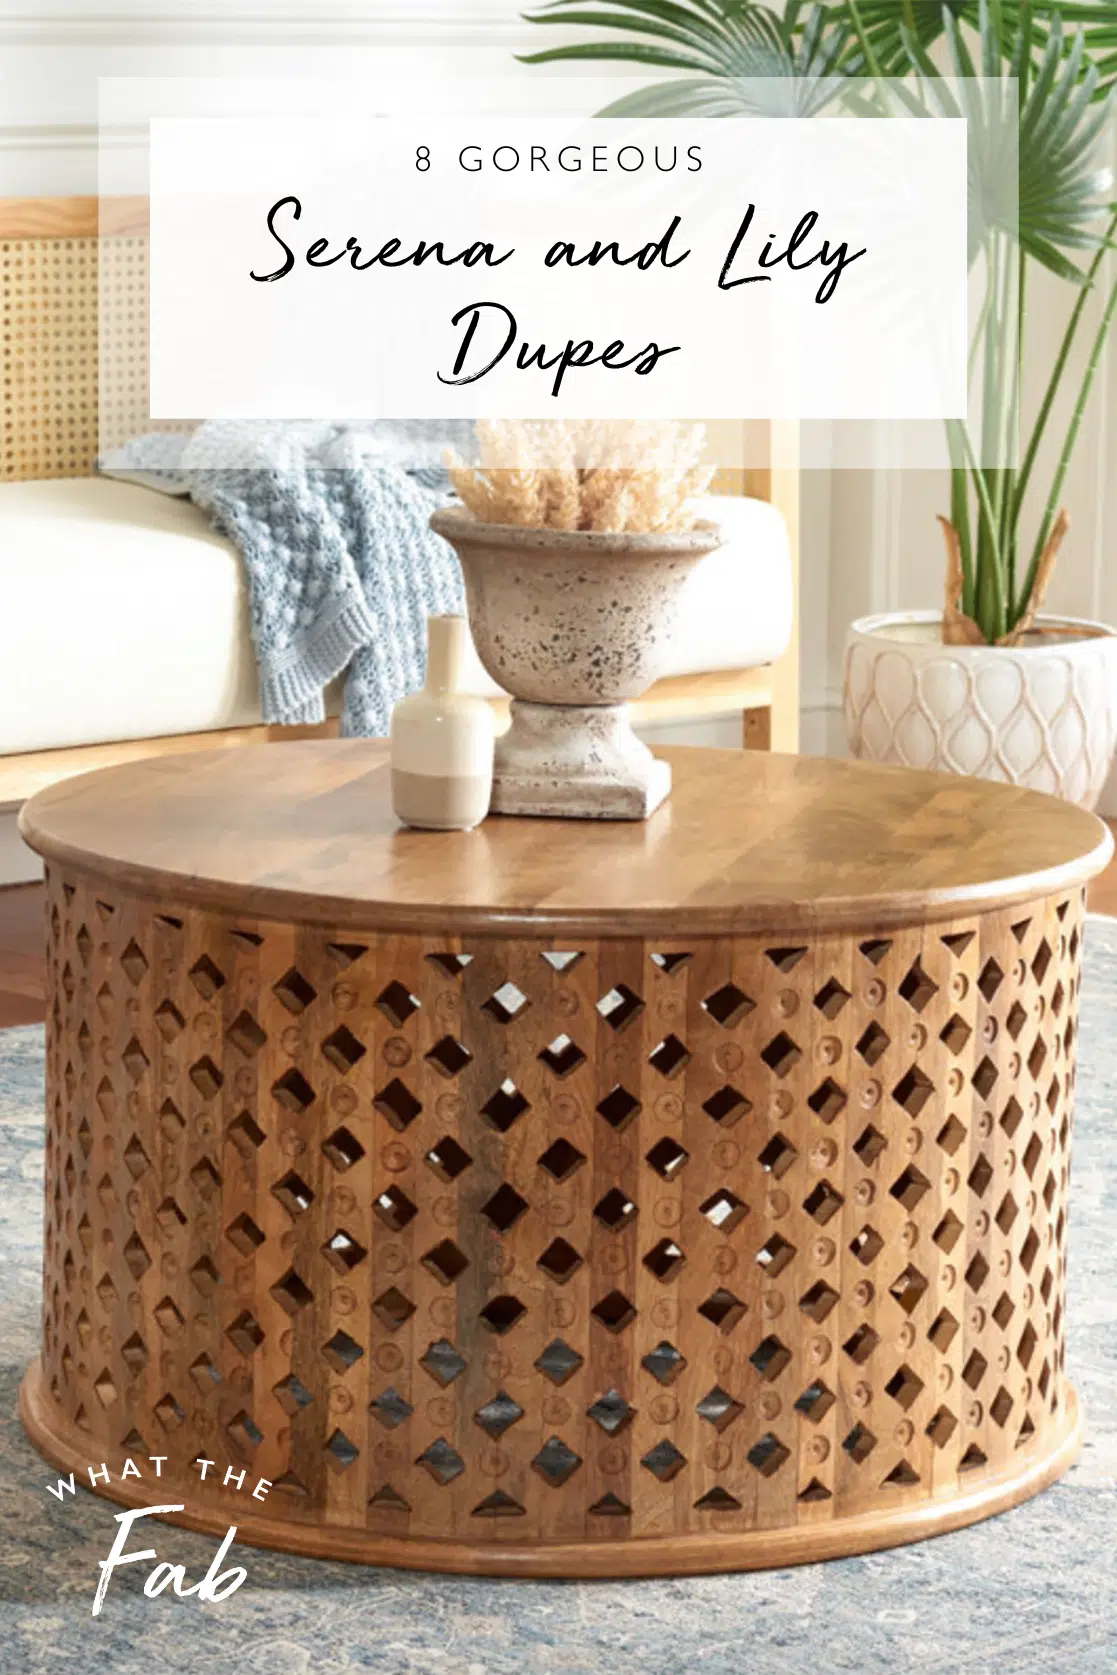 SERENA AND LILY COPYCATS, RESTORATION HARDWARE DUPES, AND MCGEE